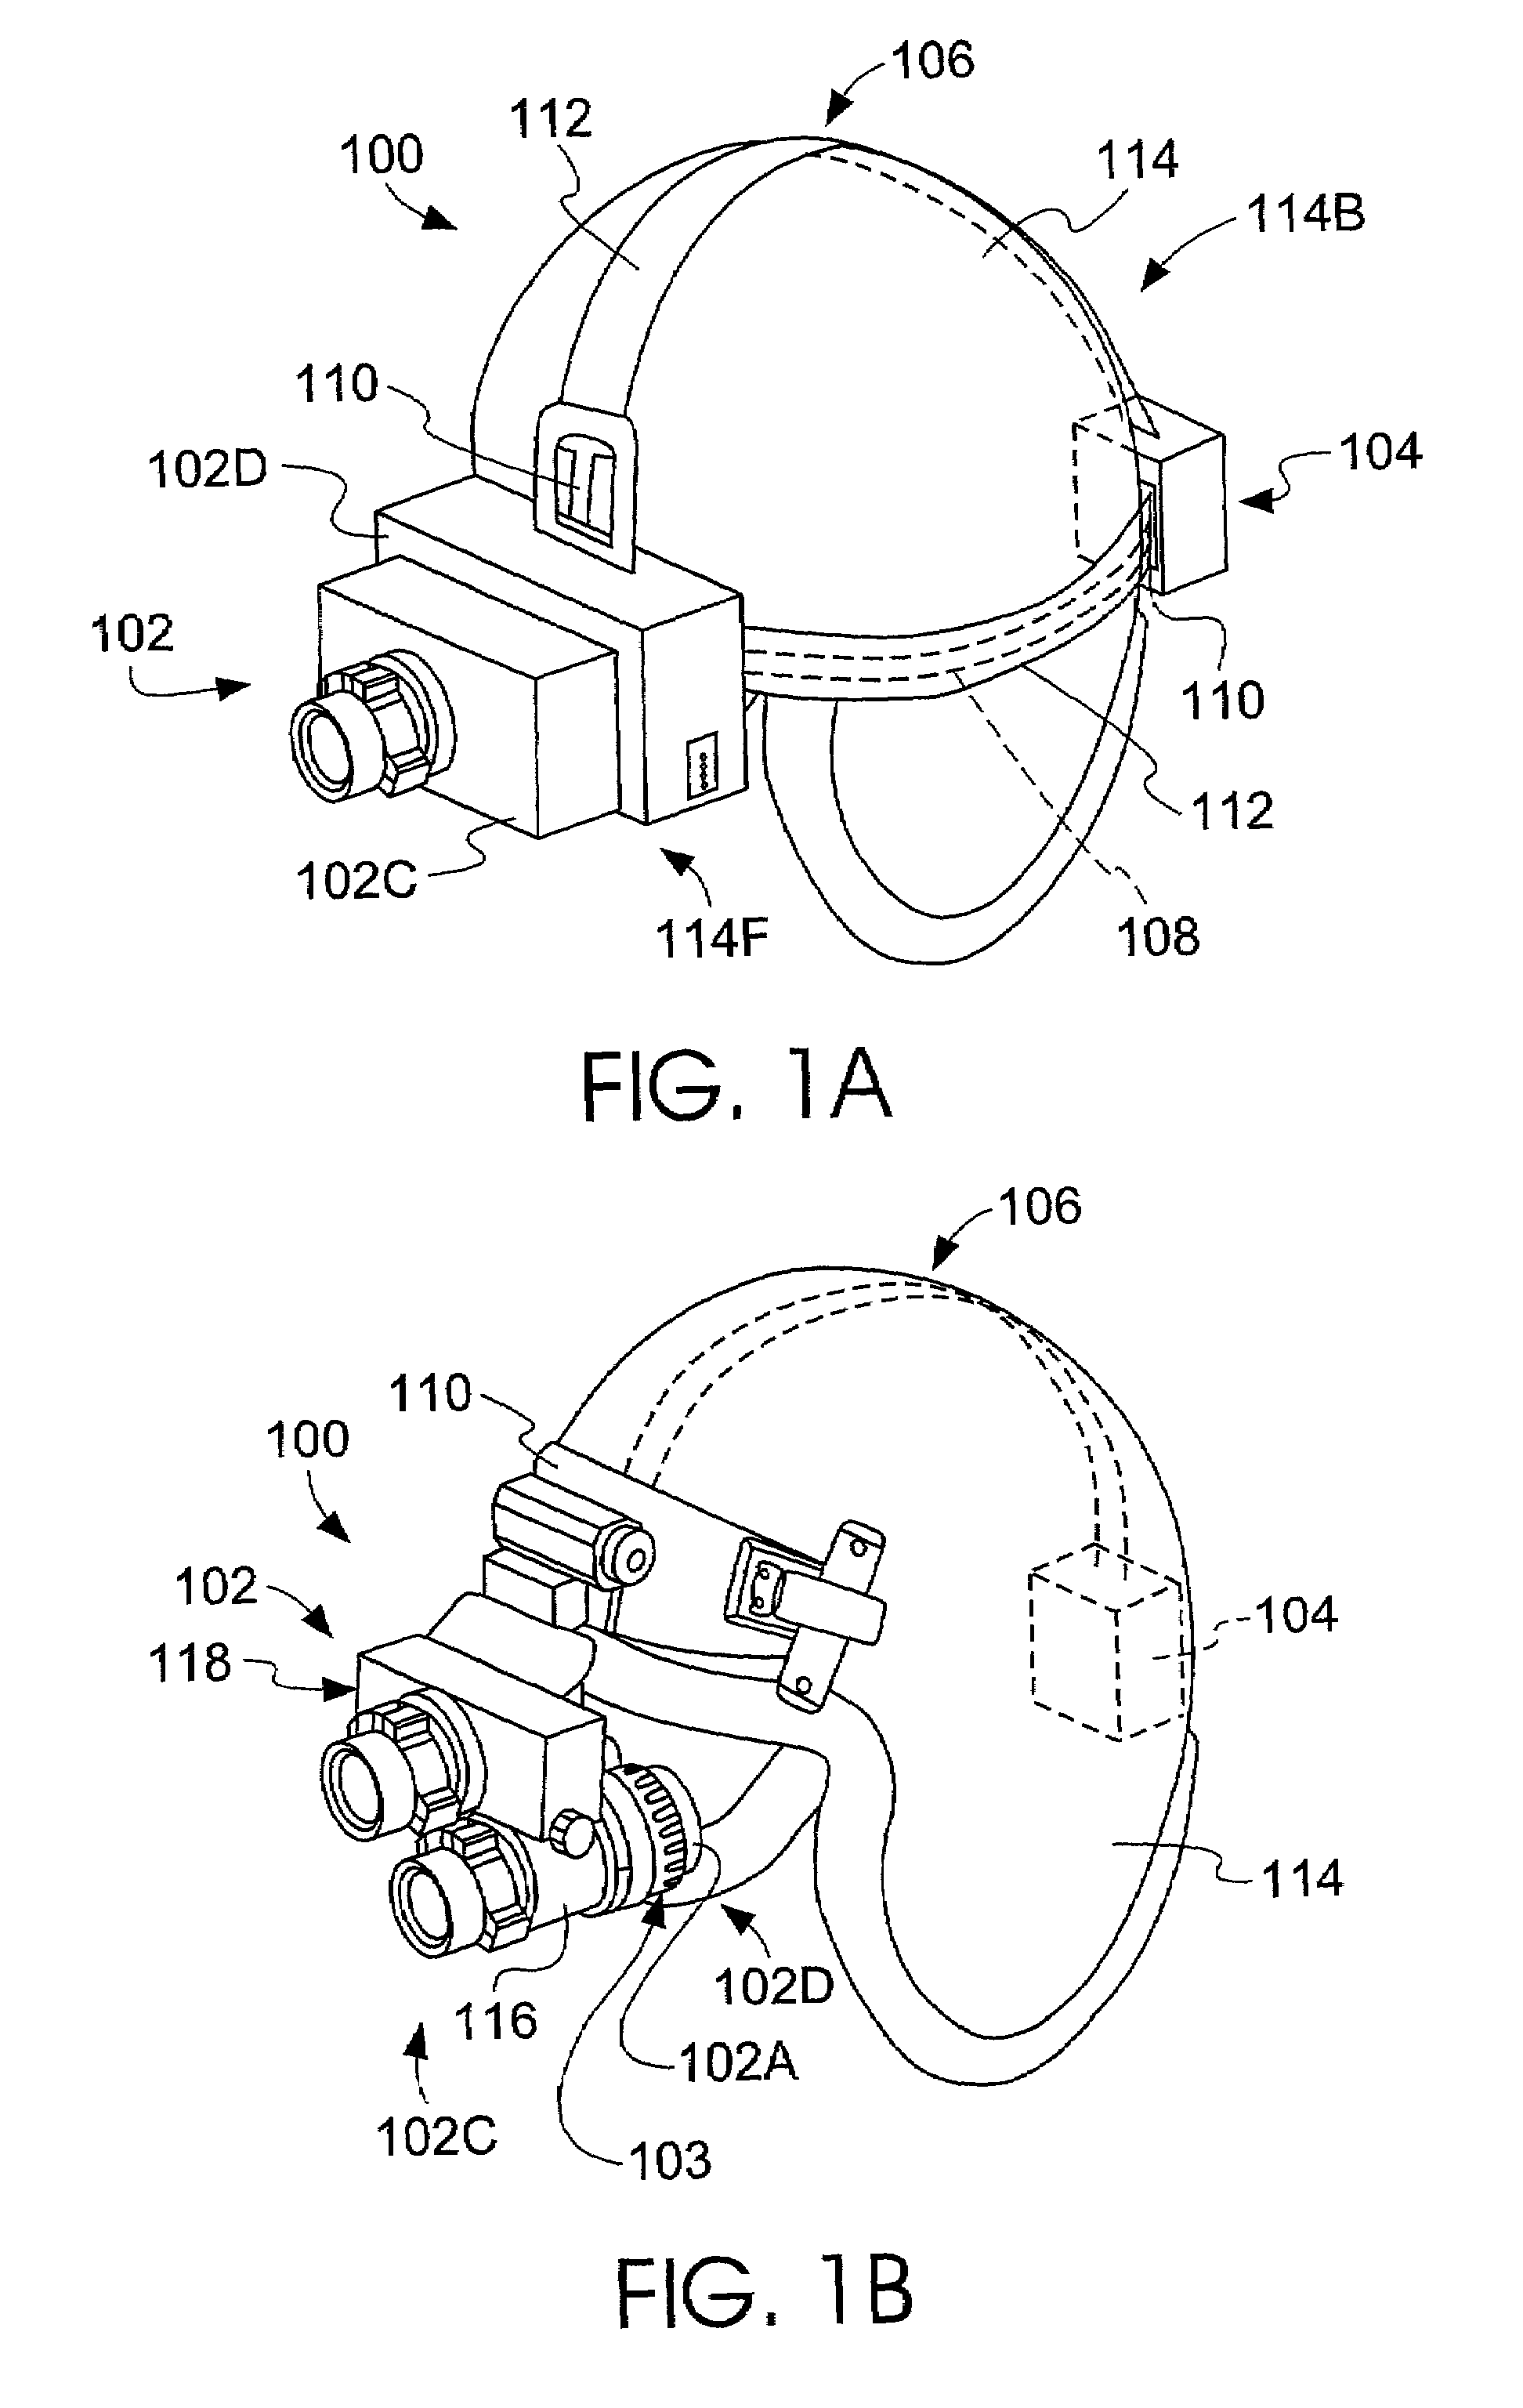 Image intensifier and LWIR fusion/combination system